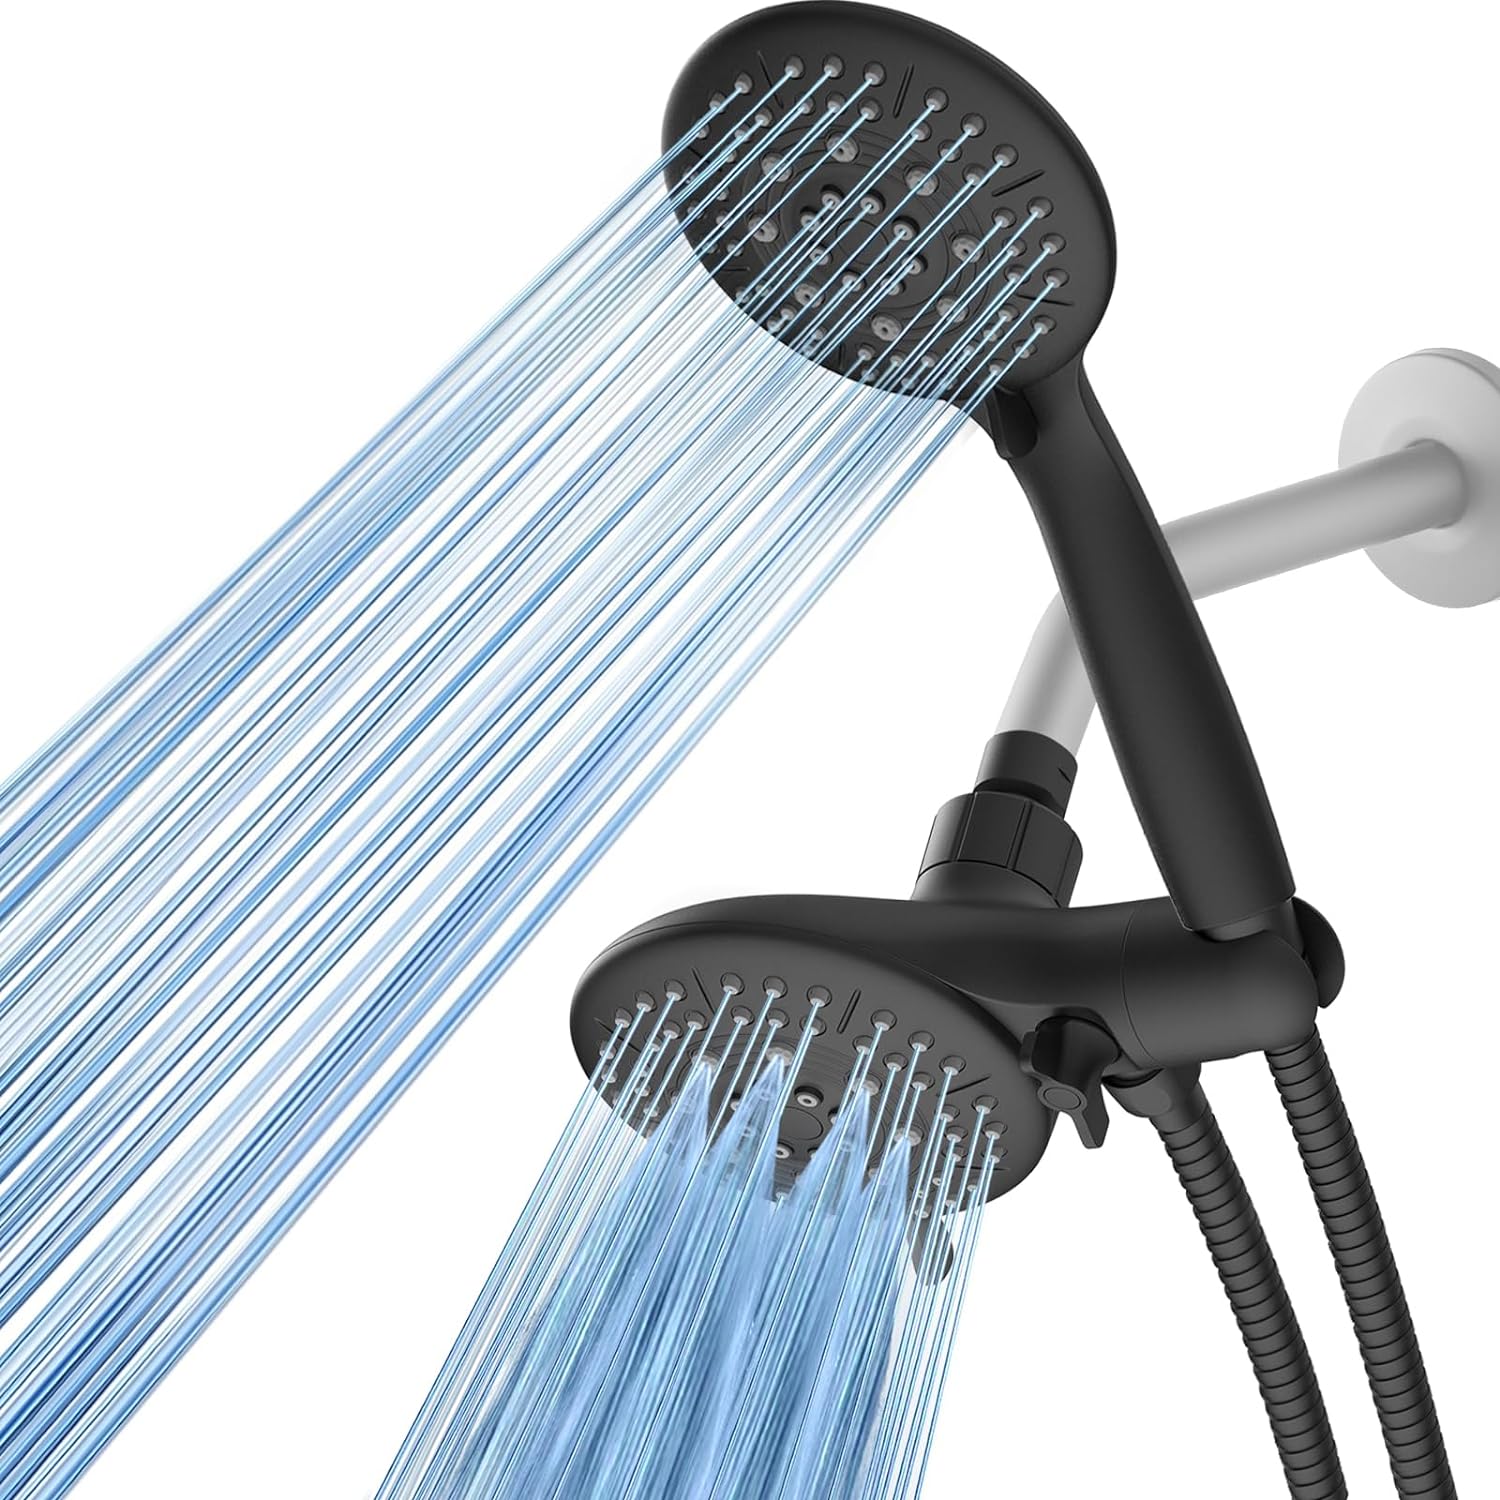 Cobbe 48-Setting High Pressure 3-Way Shower Head Combo, Hand Held Shower & Rain Shower Separately or Together, 4.7 Dual 2 in 1 Showerhead with Stainless Steel Hose - Matte Black